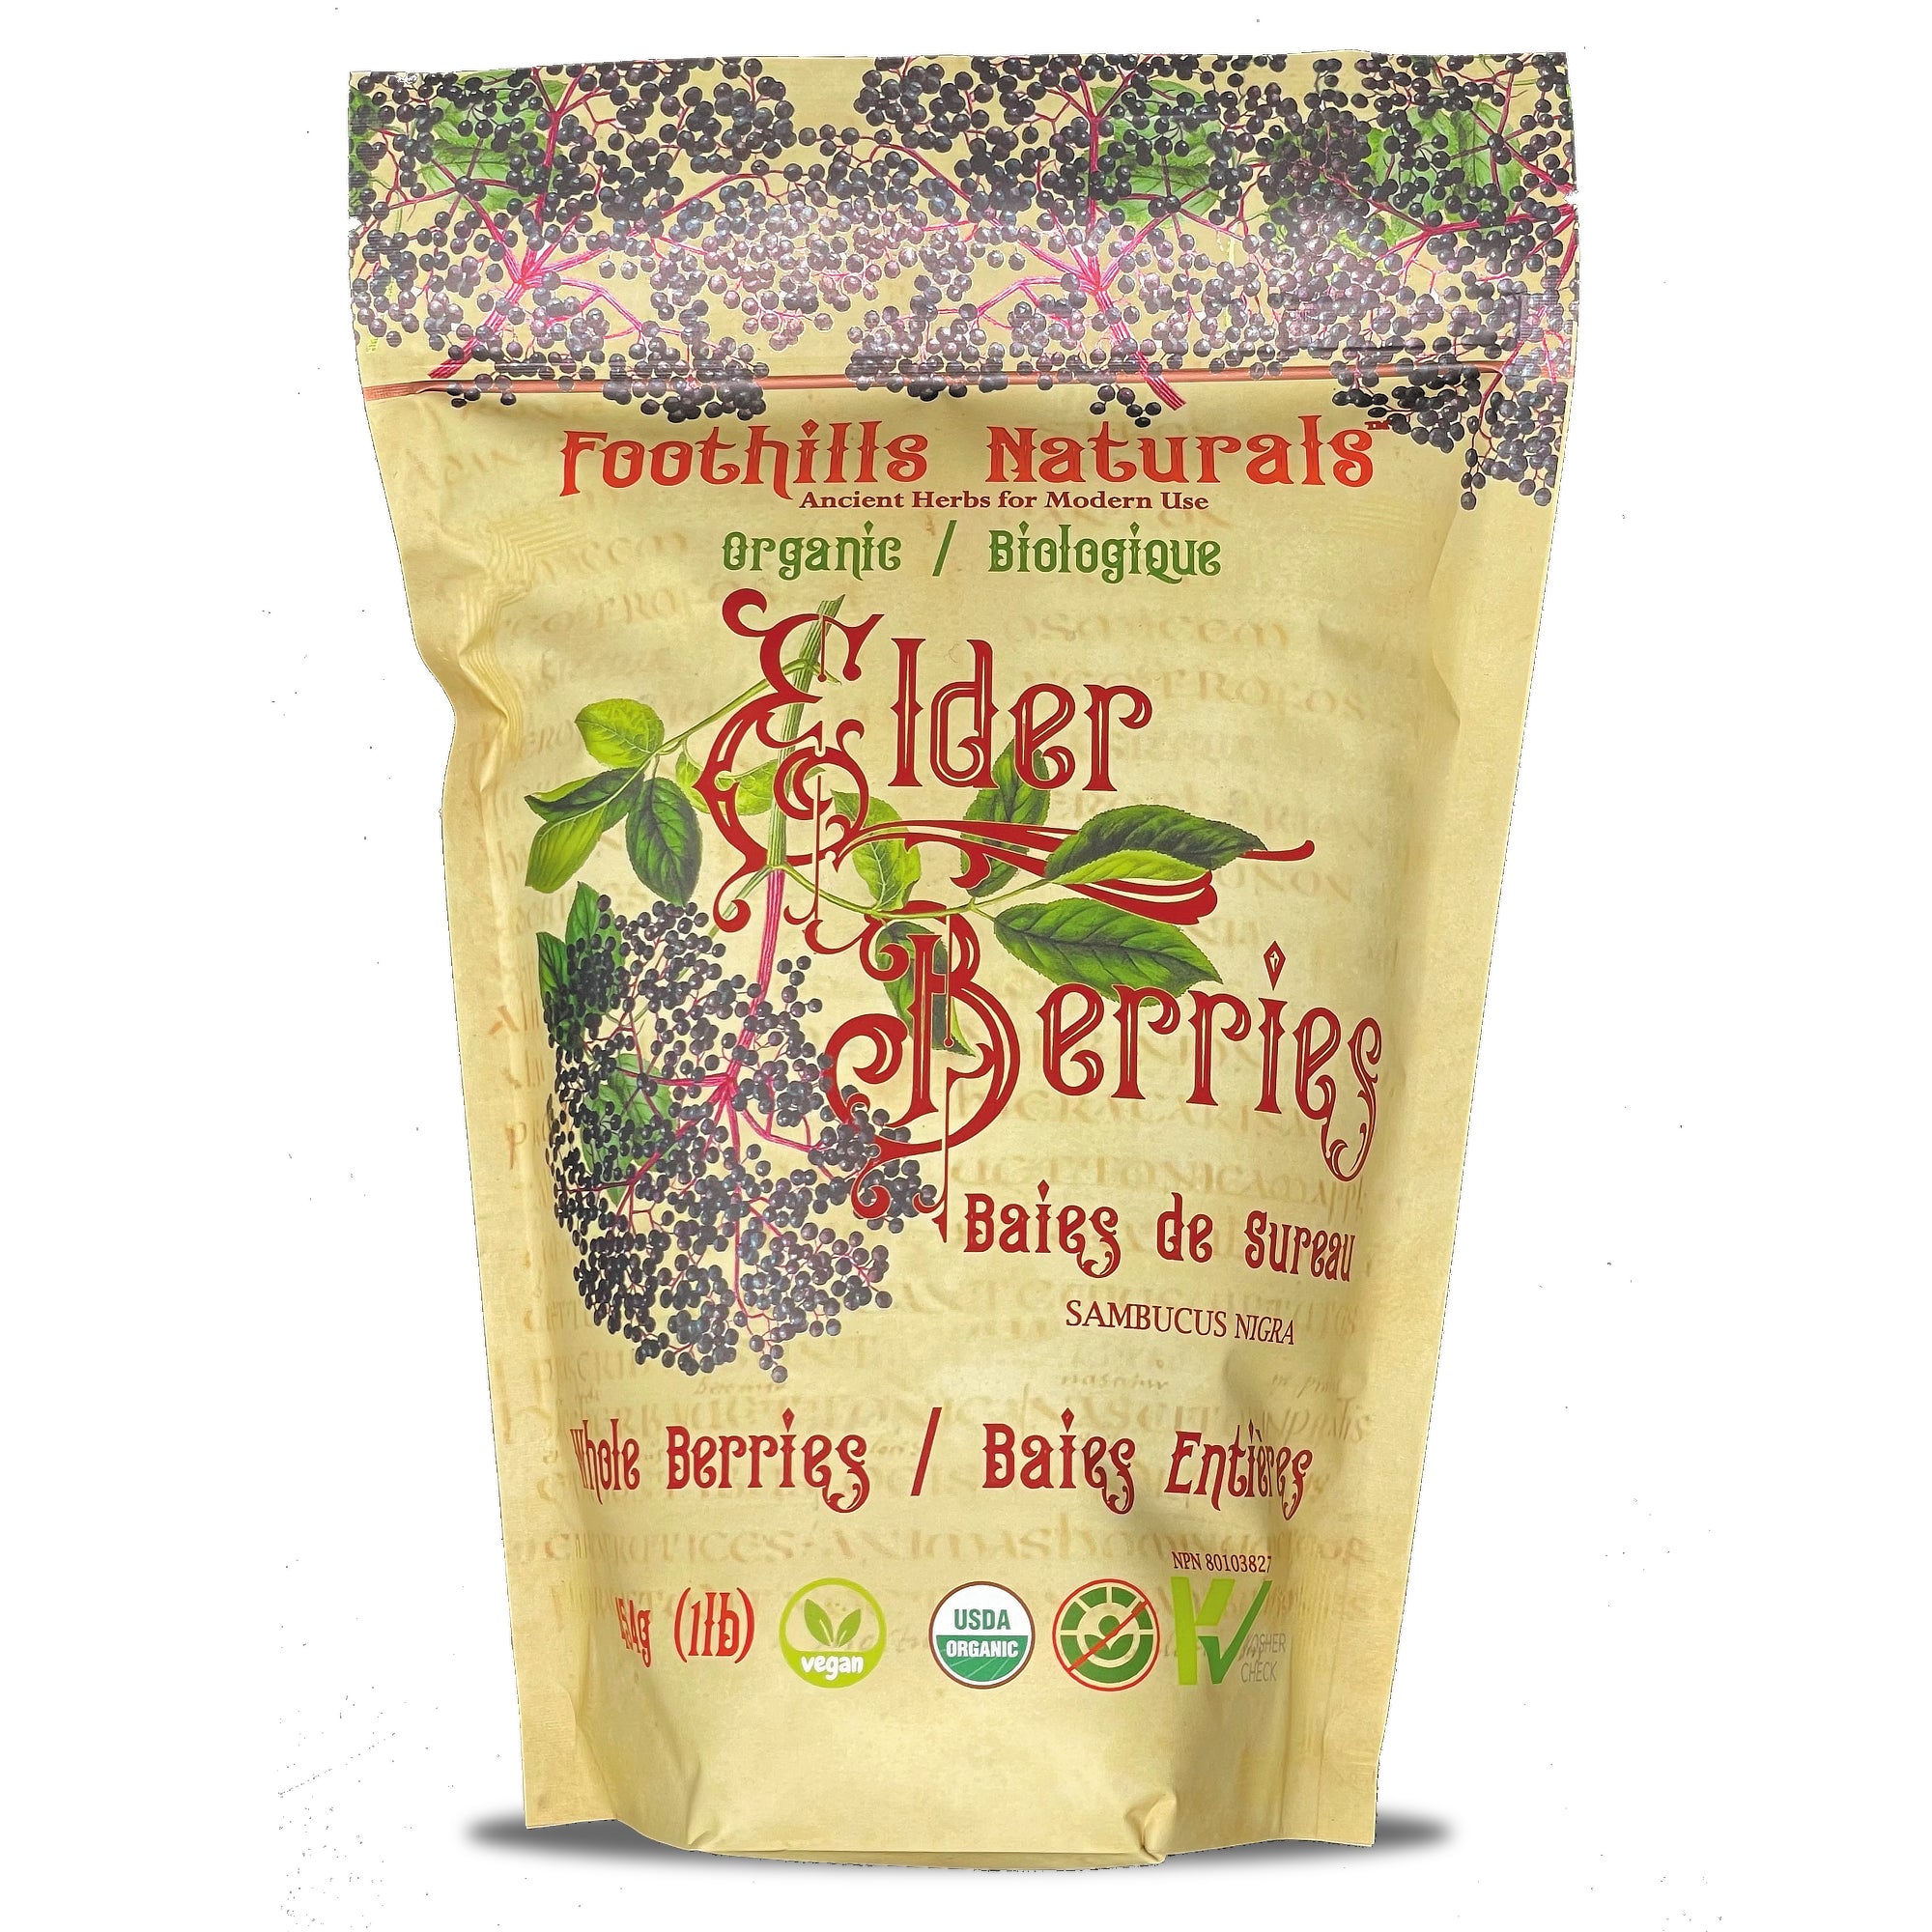 Elderberry Organic Whole - Antioxidants, Kidney Health, Pain Management, Cold and Flu Relief